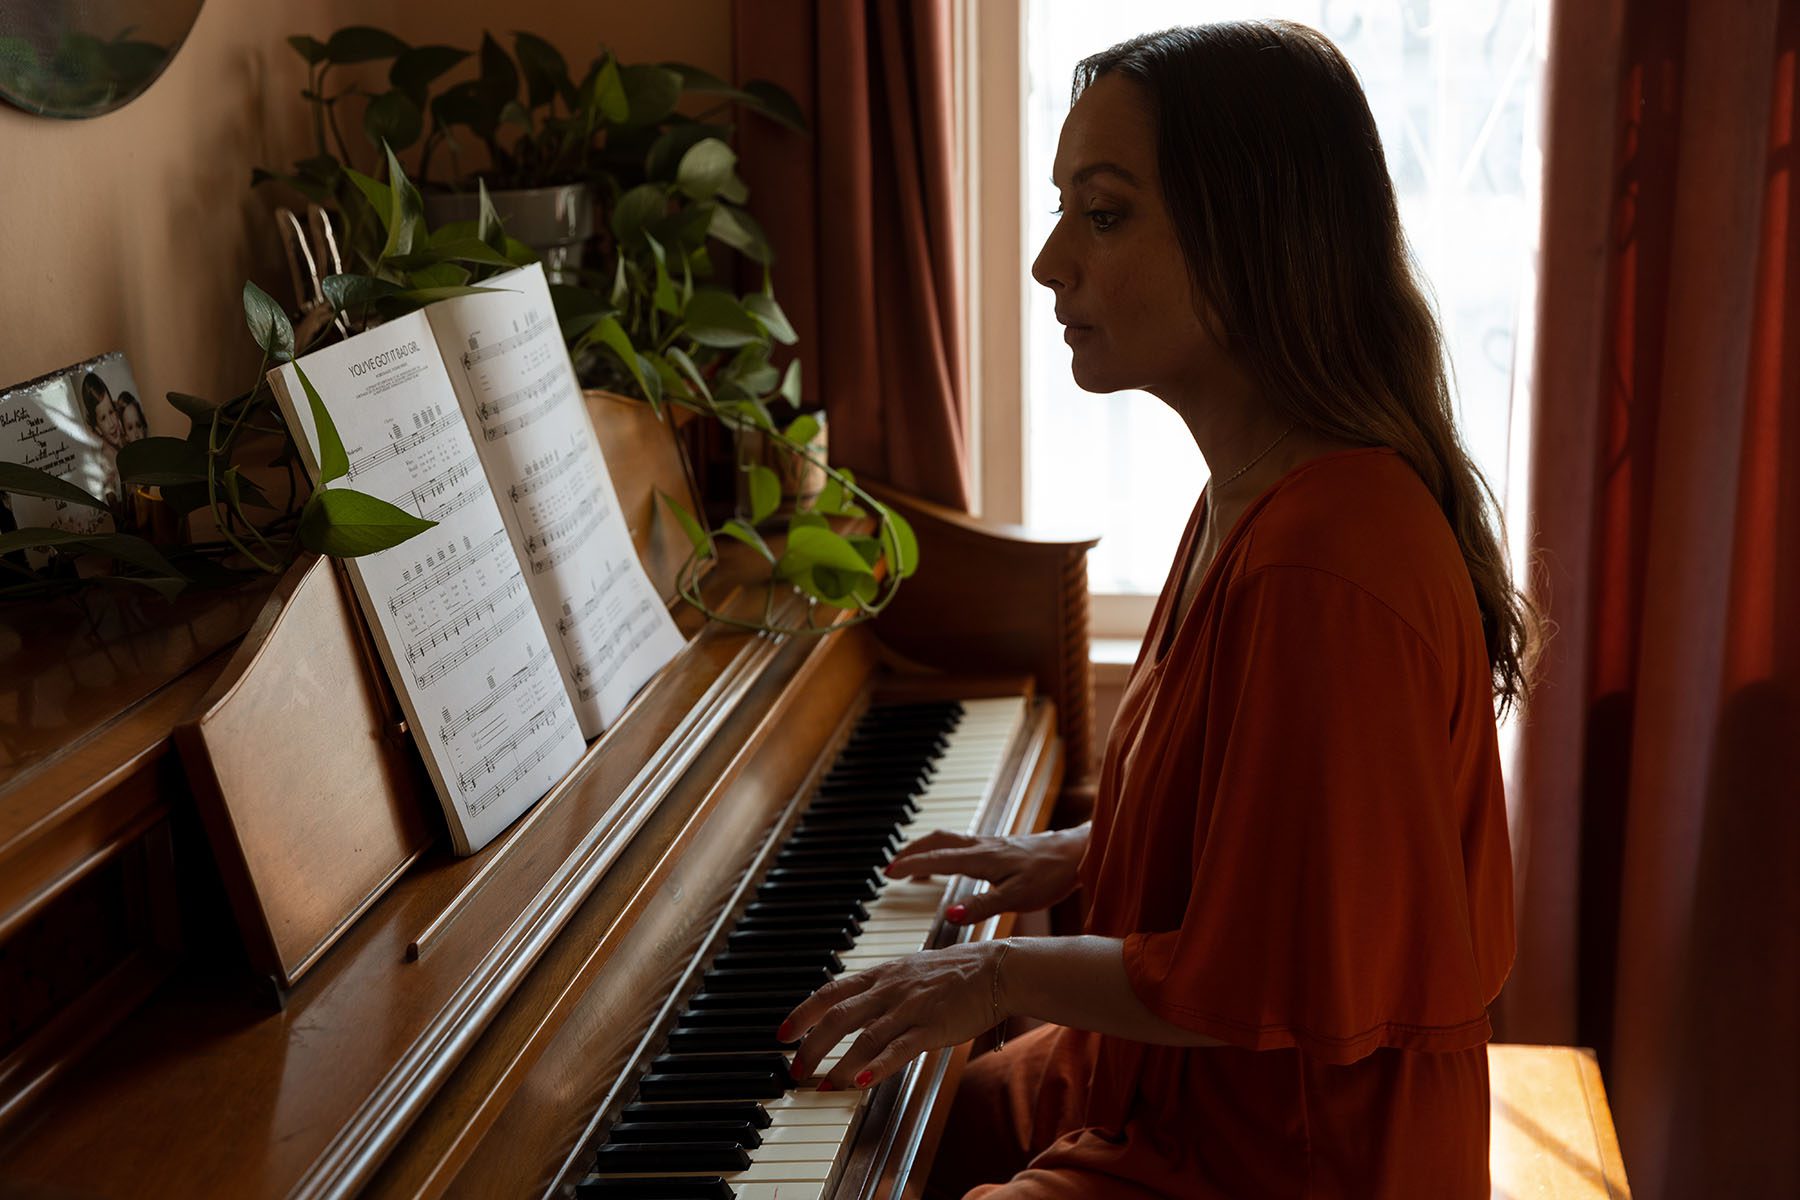 Larissa Gomes plays the piano at her home.